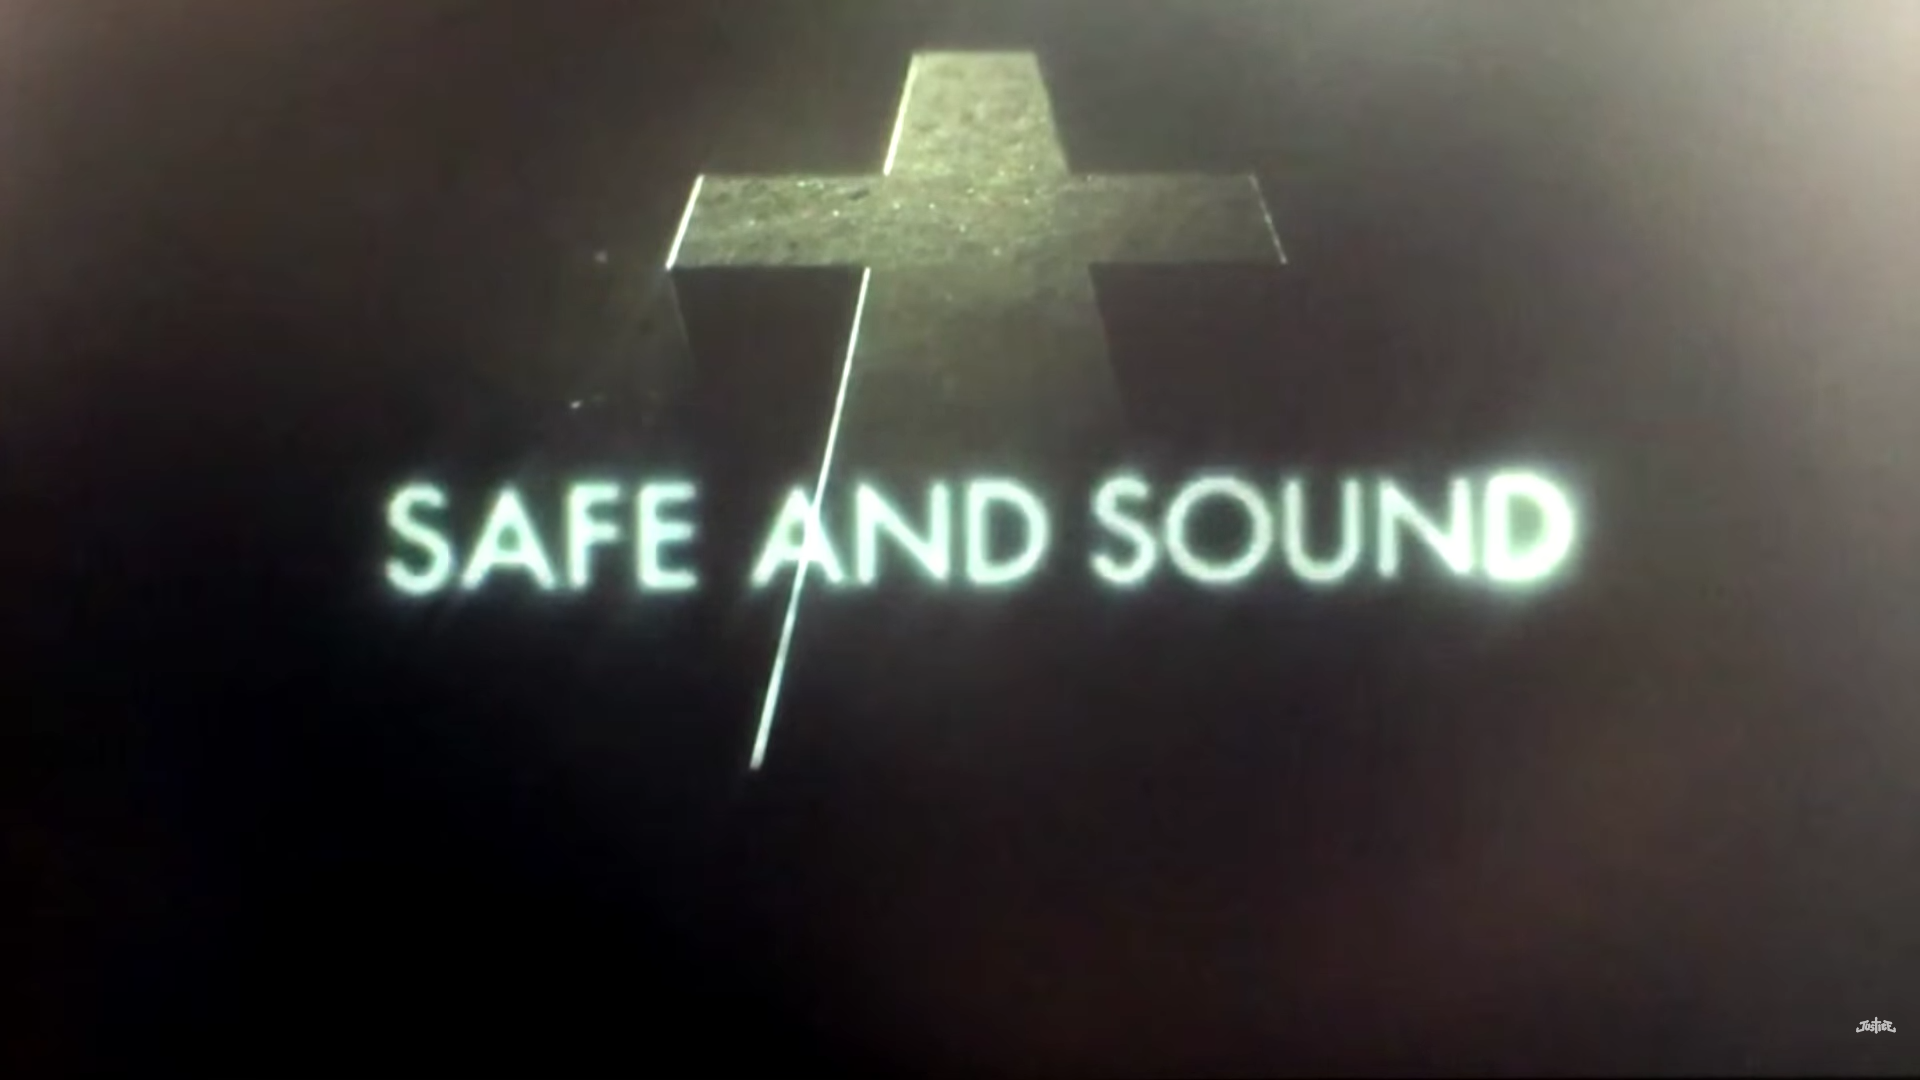 Justice new single for Safe and Sound. Photo by: Justice / YouTube